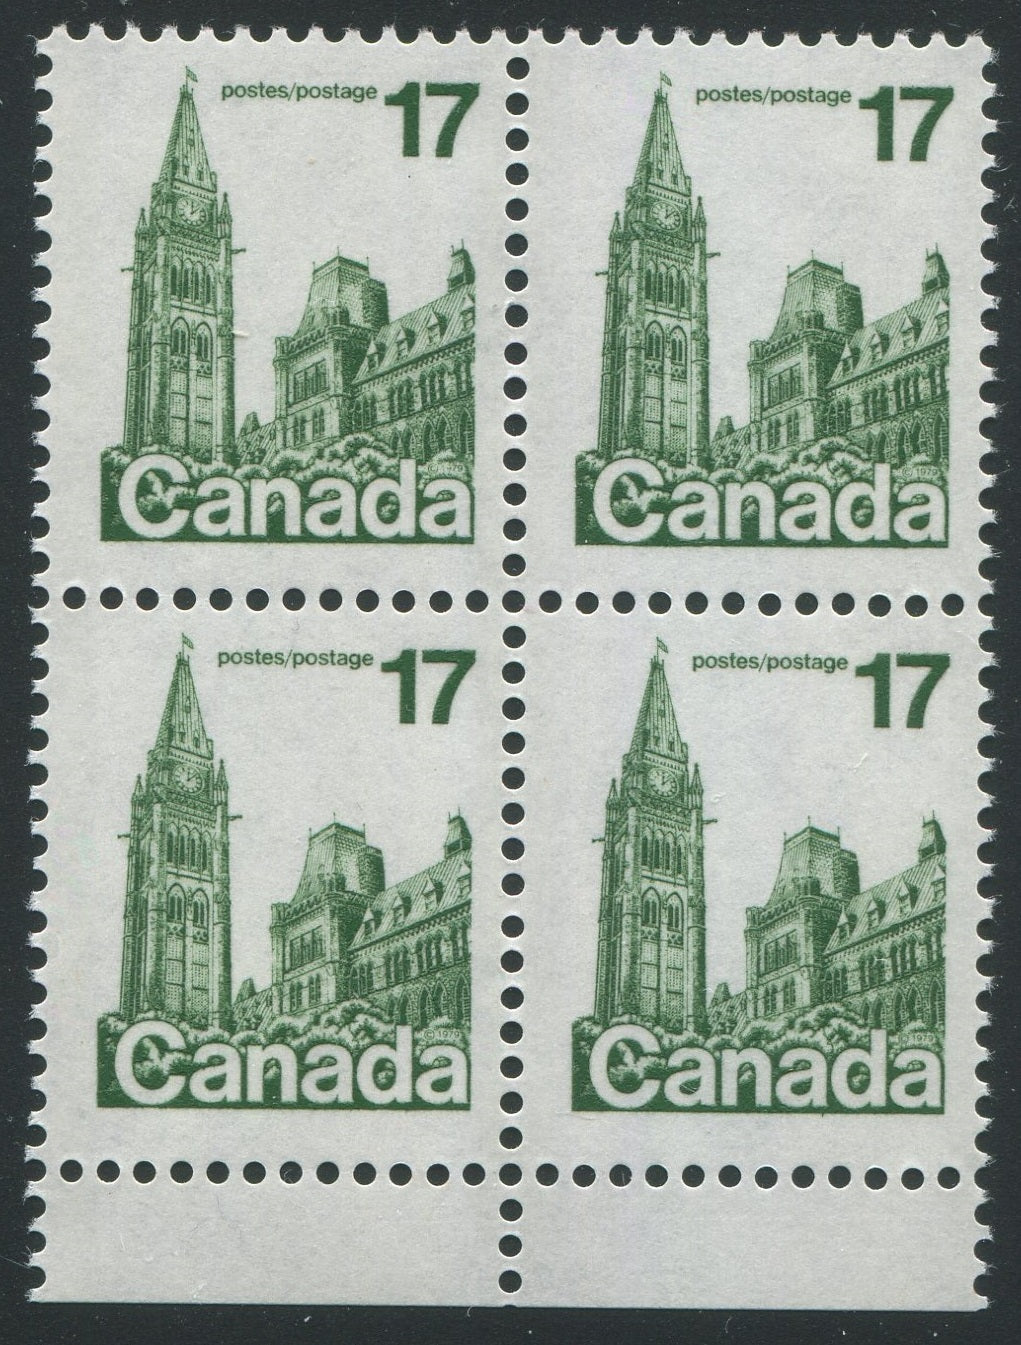 0790CA2007 - Canada #790 - Mint Block of 4, Double Tagging Variety